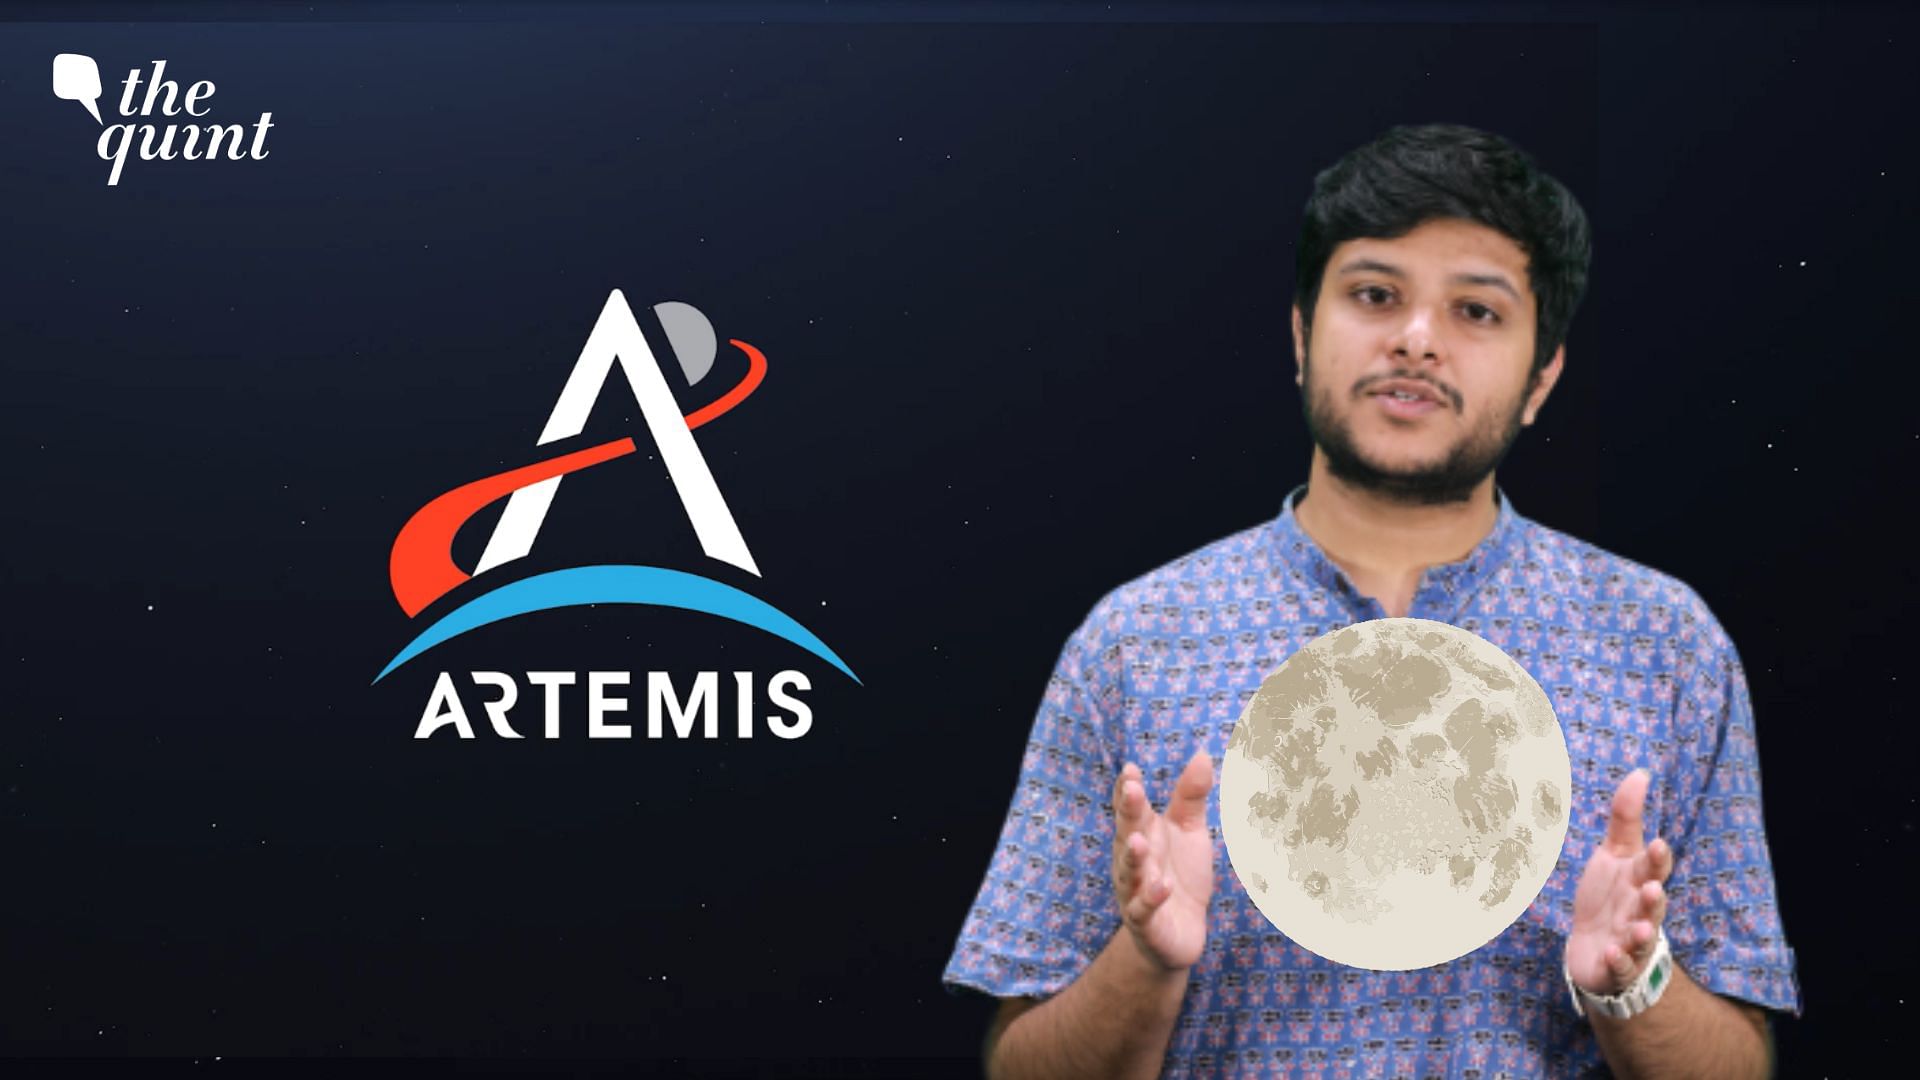 <div class="paragraphs"><p>Now, 50 years later, NASA is once again sending people to the Moon with Apollo's successor, <a href="https://www.thequint.com/topic/artemis">Artemis</a>.</p></div>